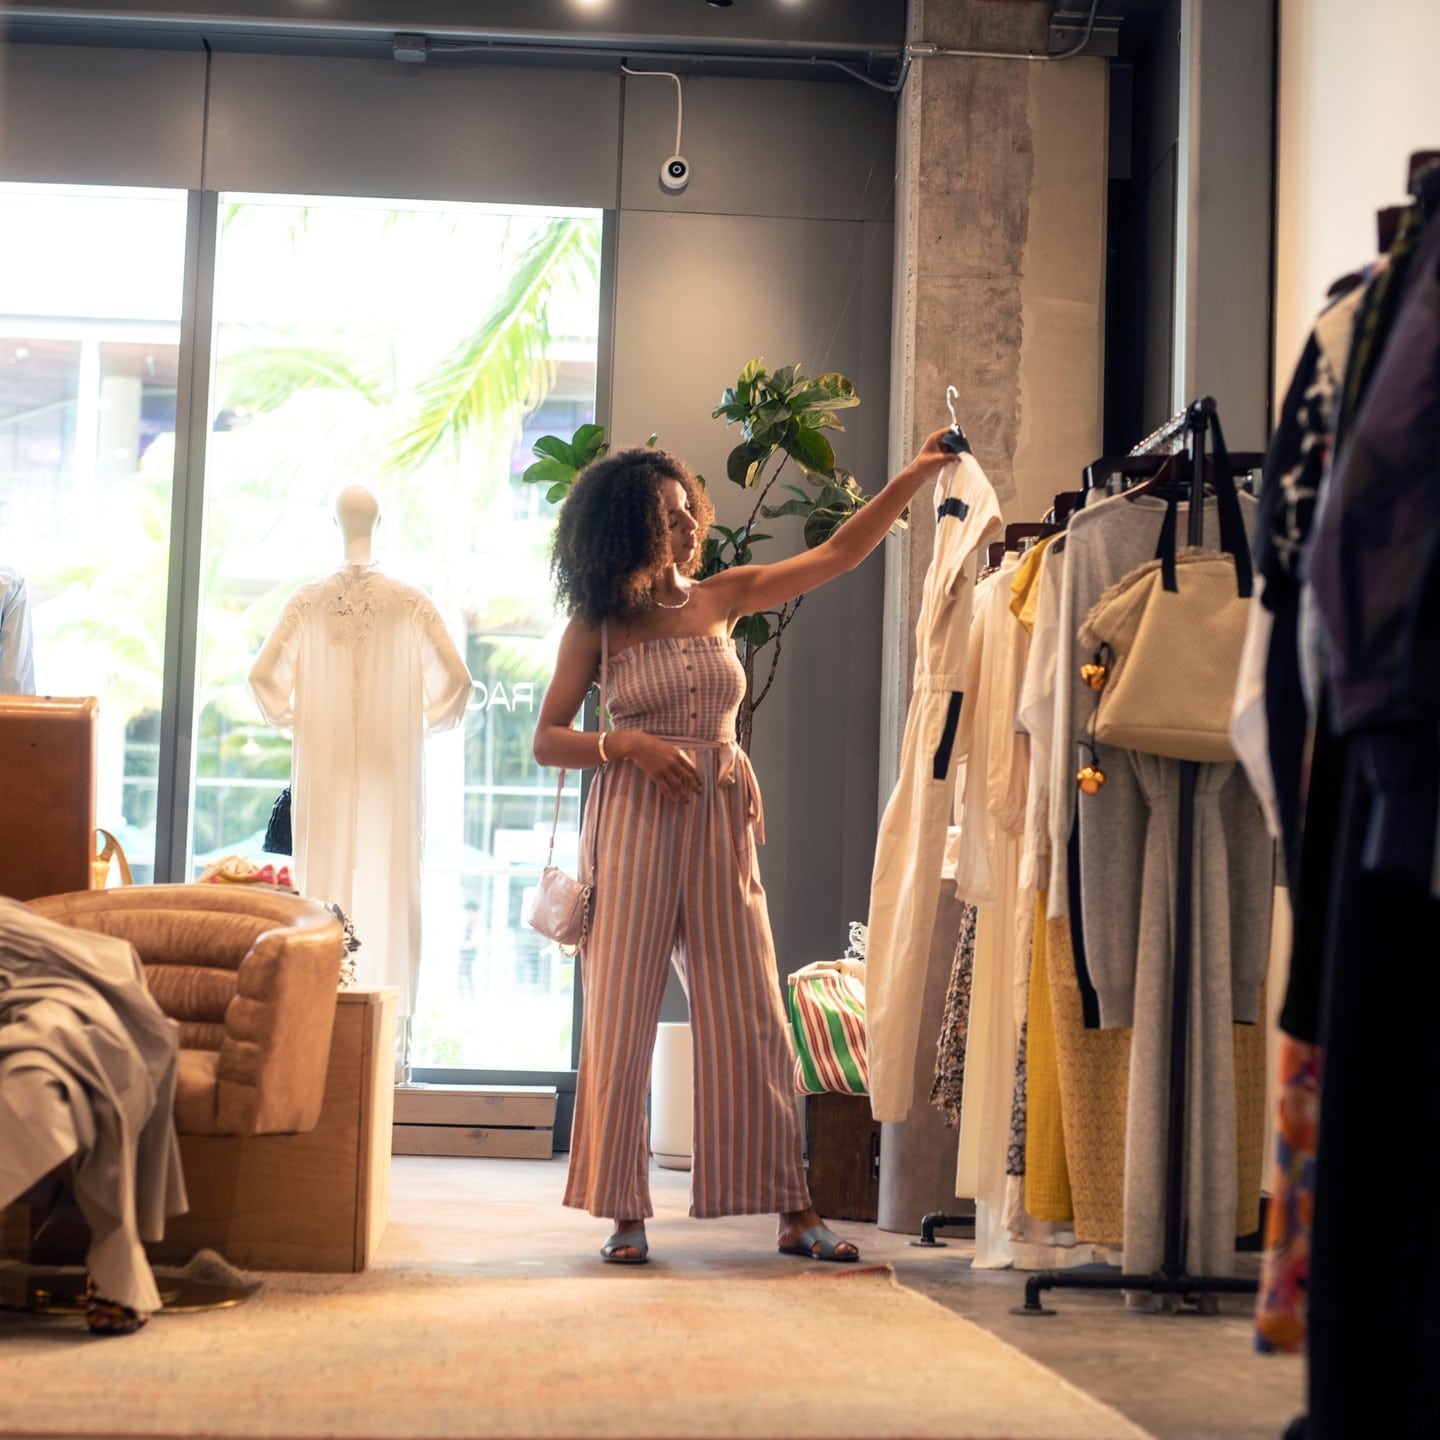 Find a new style for work or play at the one-of-a-kind neighborhood boutiques in Ward Village. There’s always something to discover!